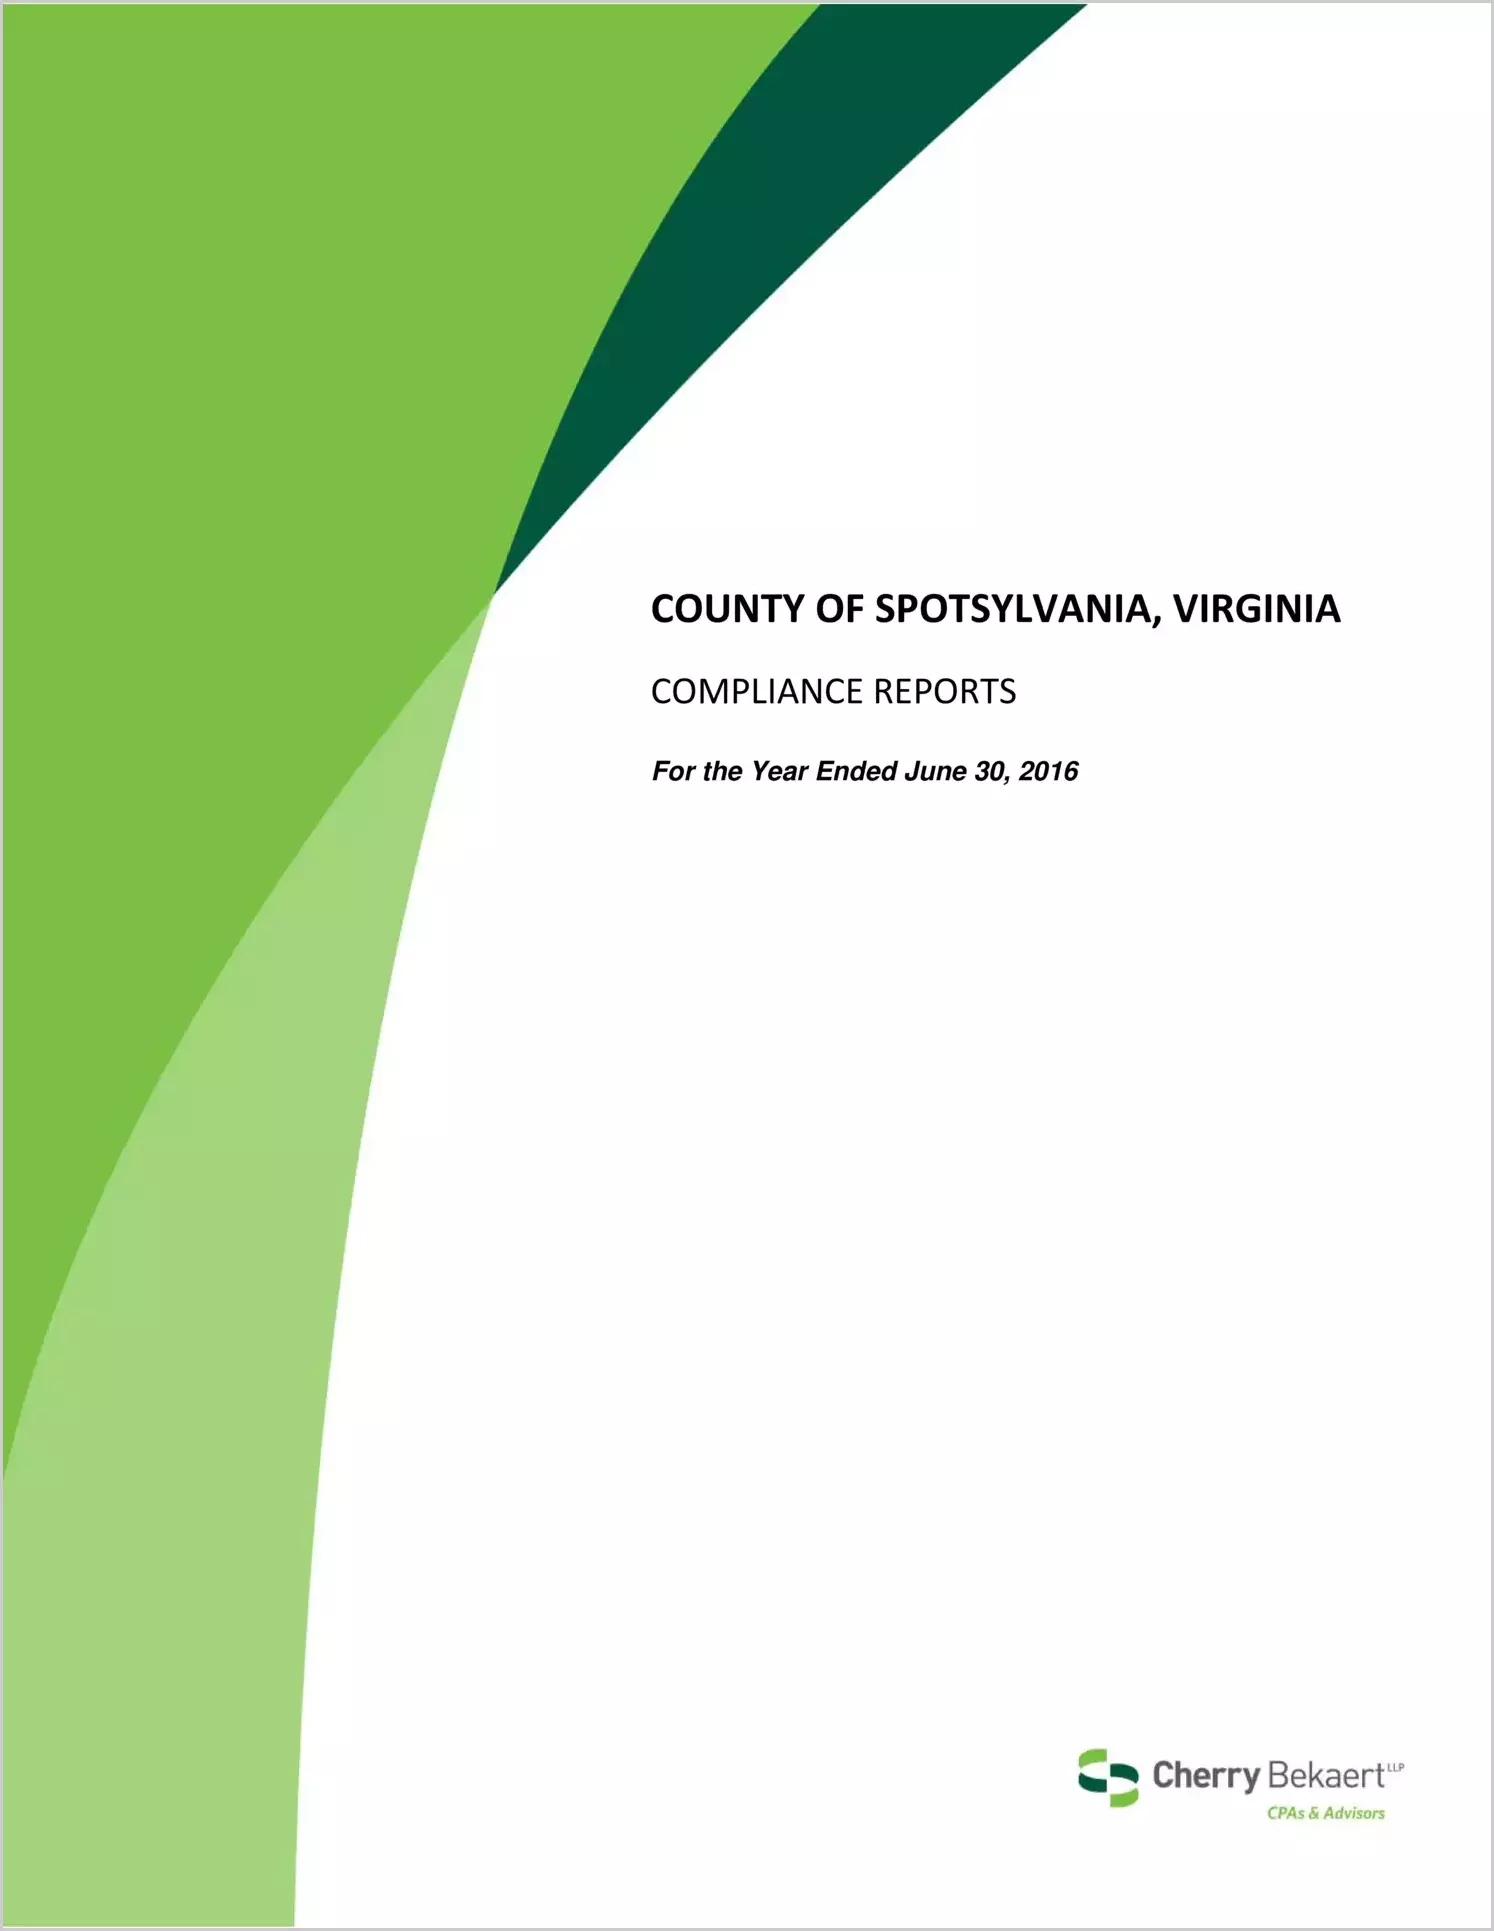 2016 Internal Control and Compliance Report for County of Spotsylvania